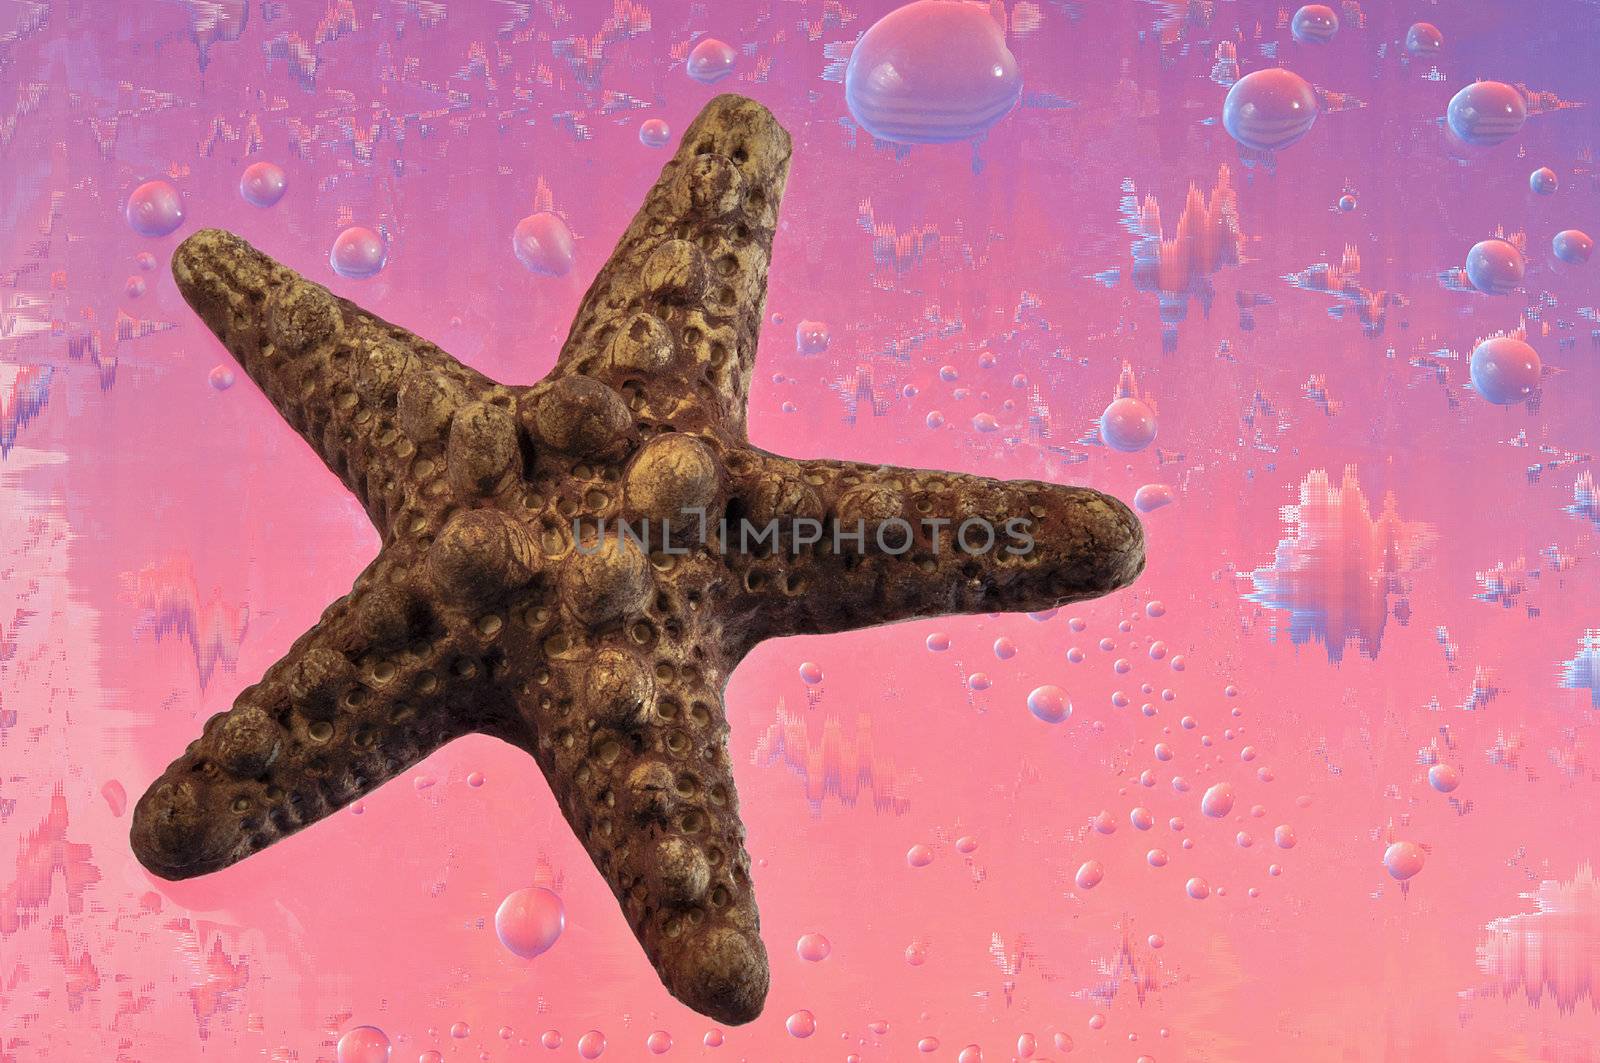 Starfish of brown color on a pink abstract background with water drops
